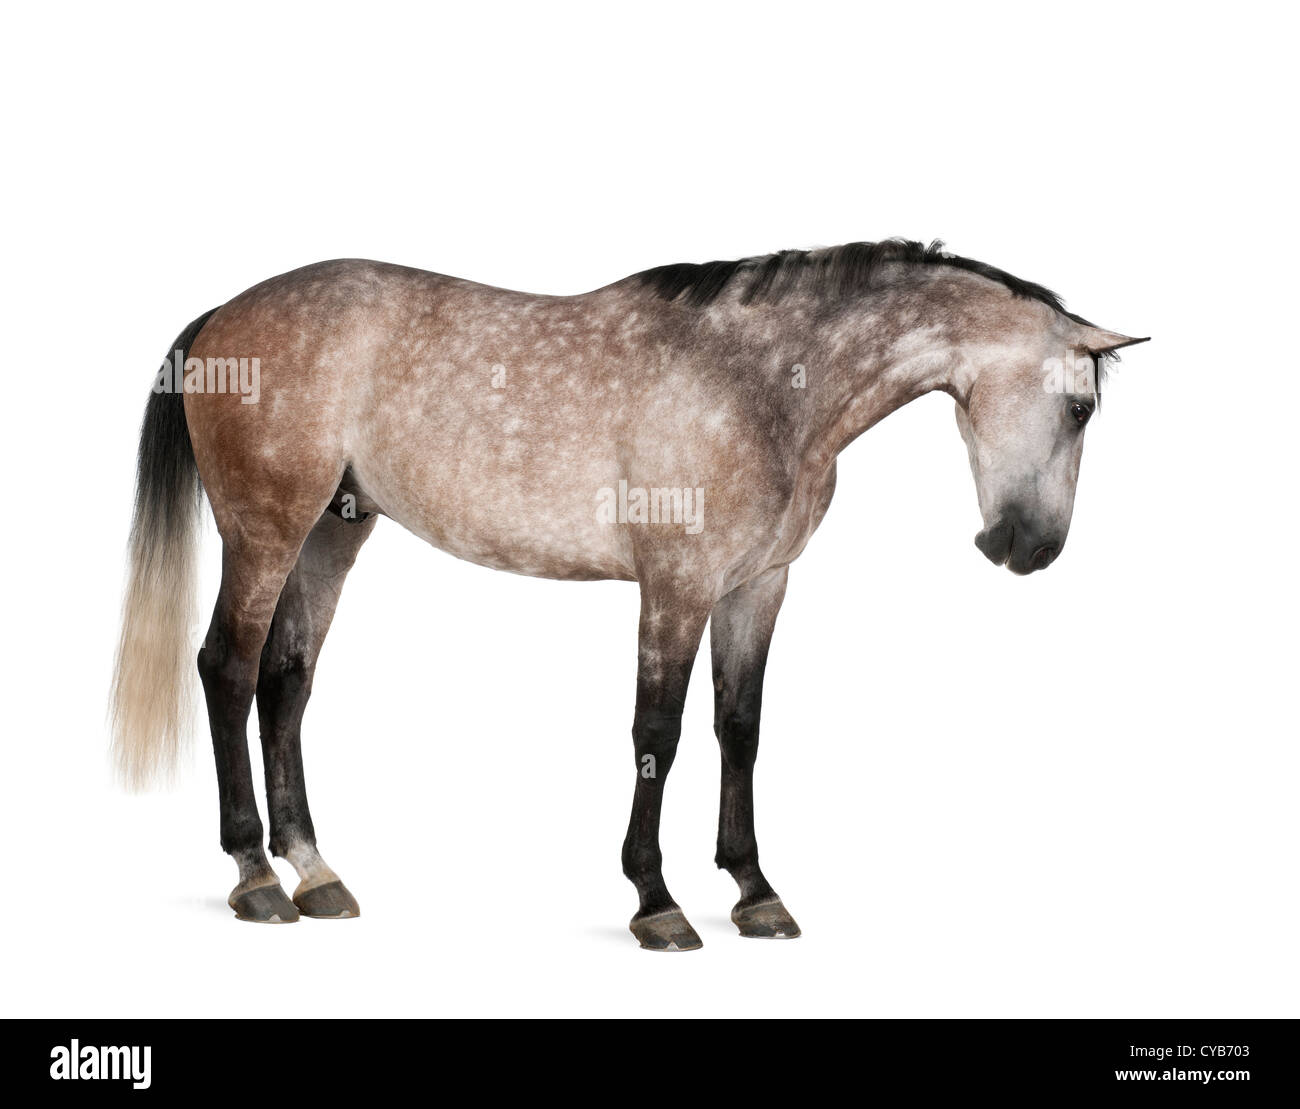 Warmblood belge, 6 ans, standing against white background Banque D'Images